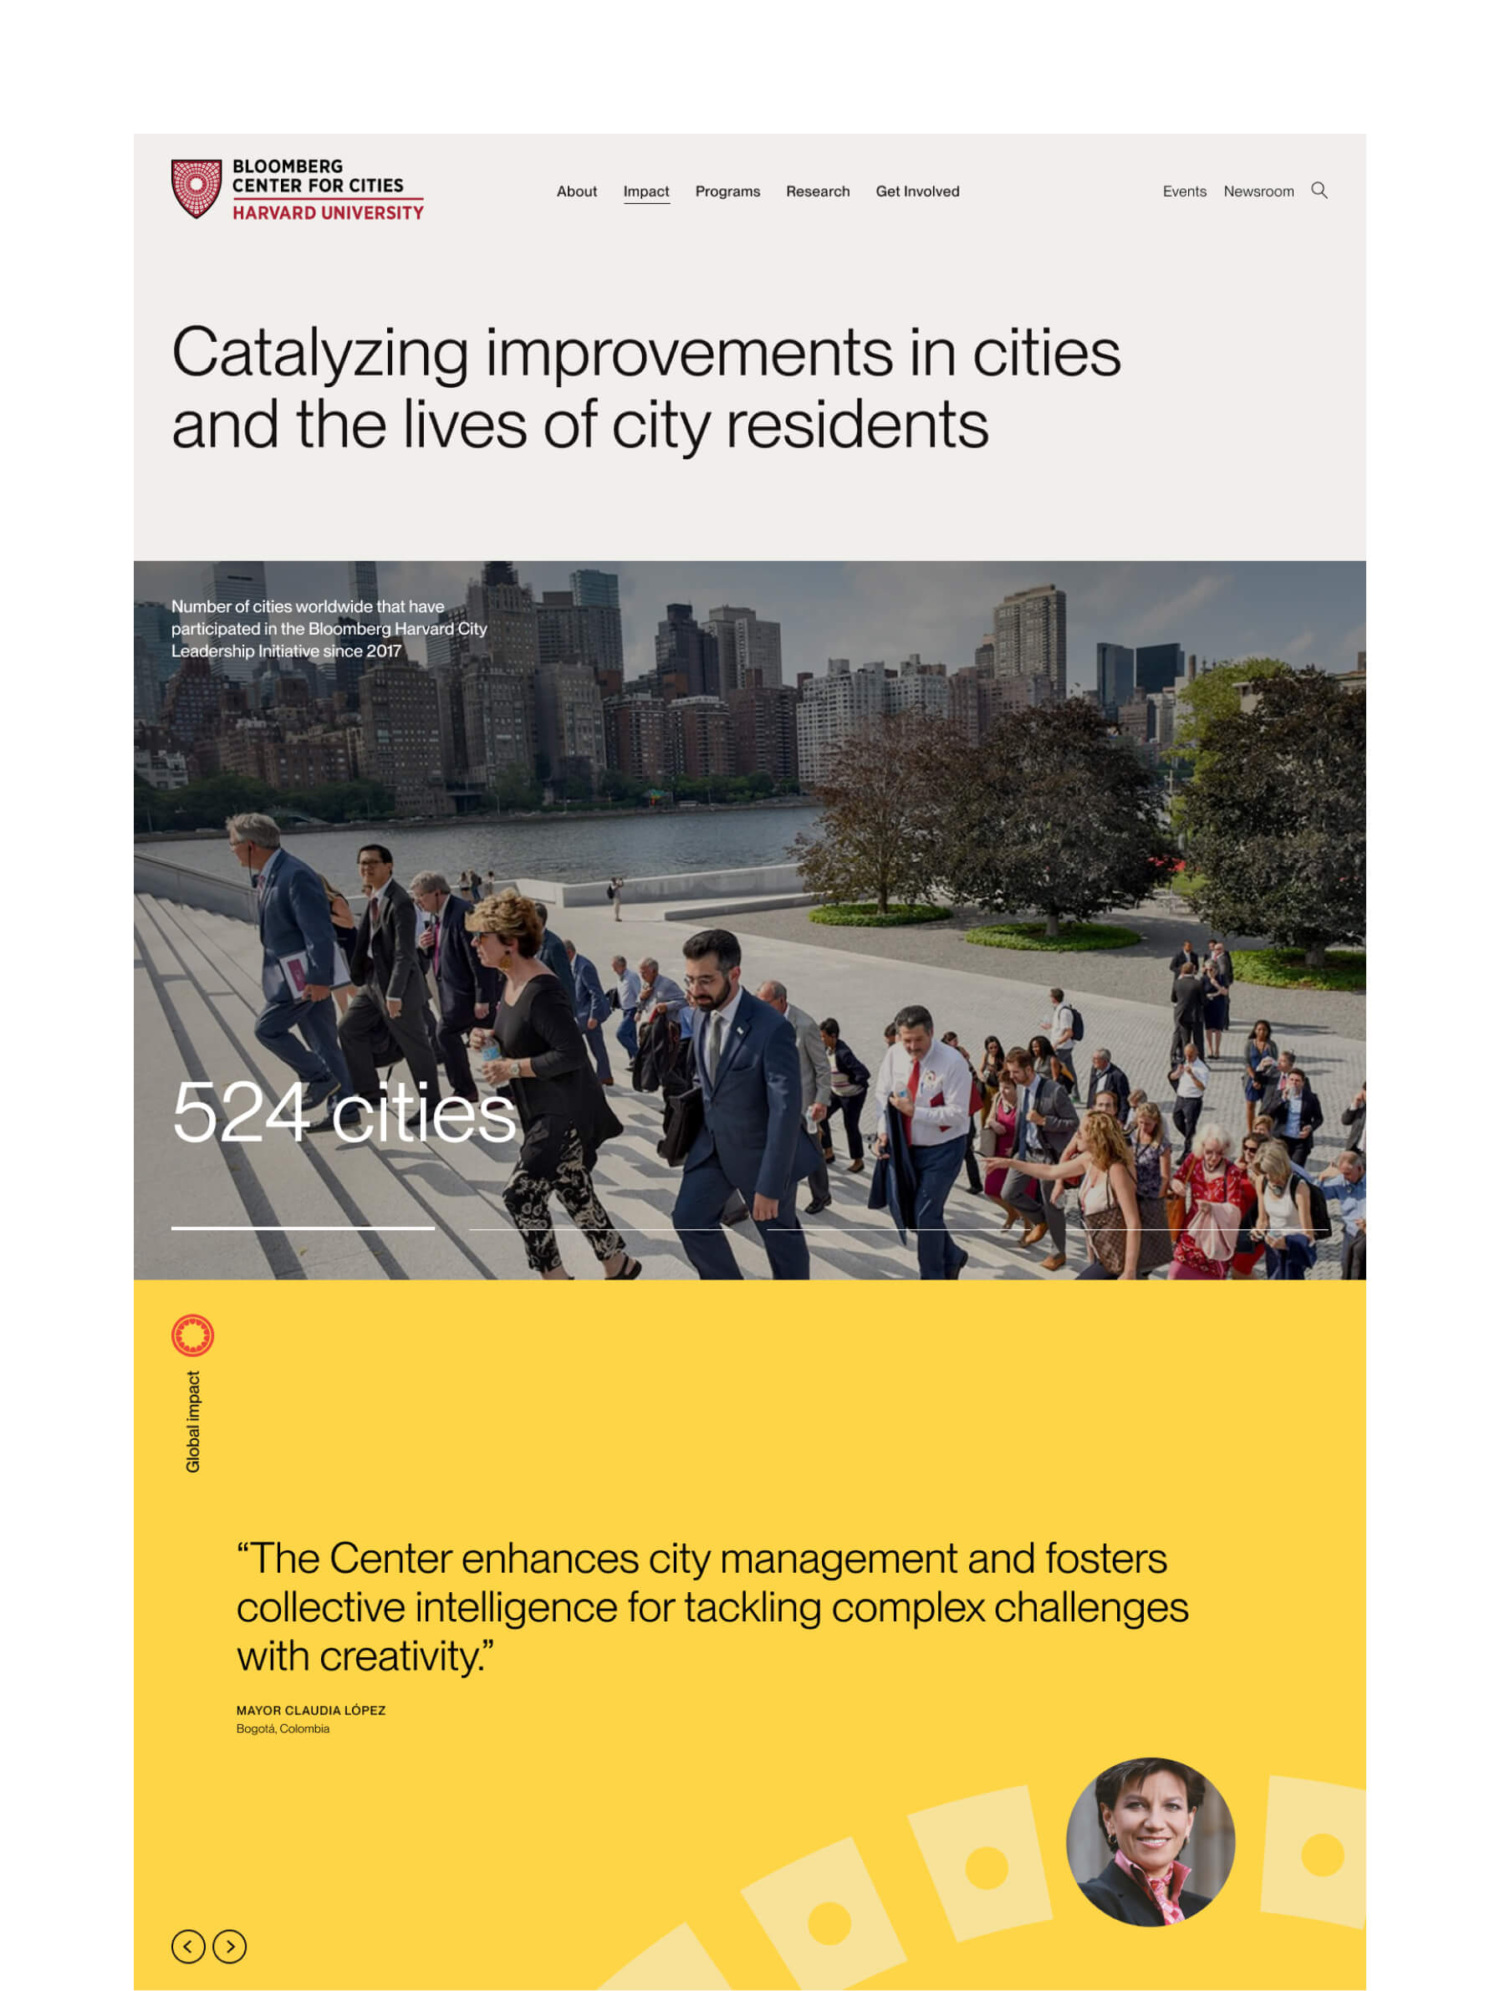 A webpage for the Bloomberg Center for Cities Harvard University with a photo of a larger group of city leaders walking up the front steps of a city hall building.